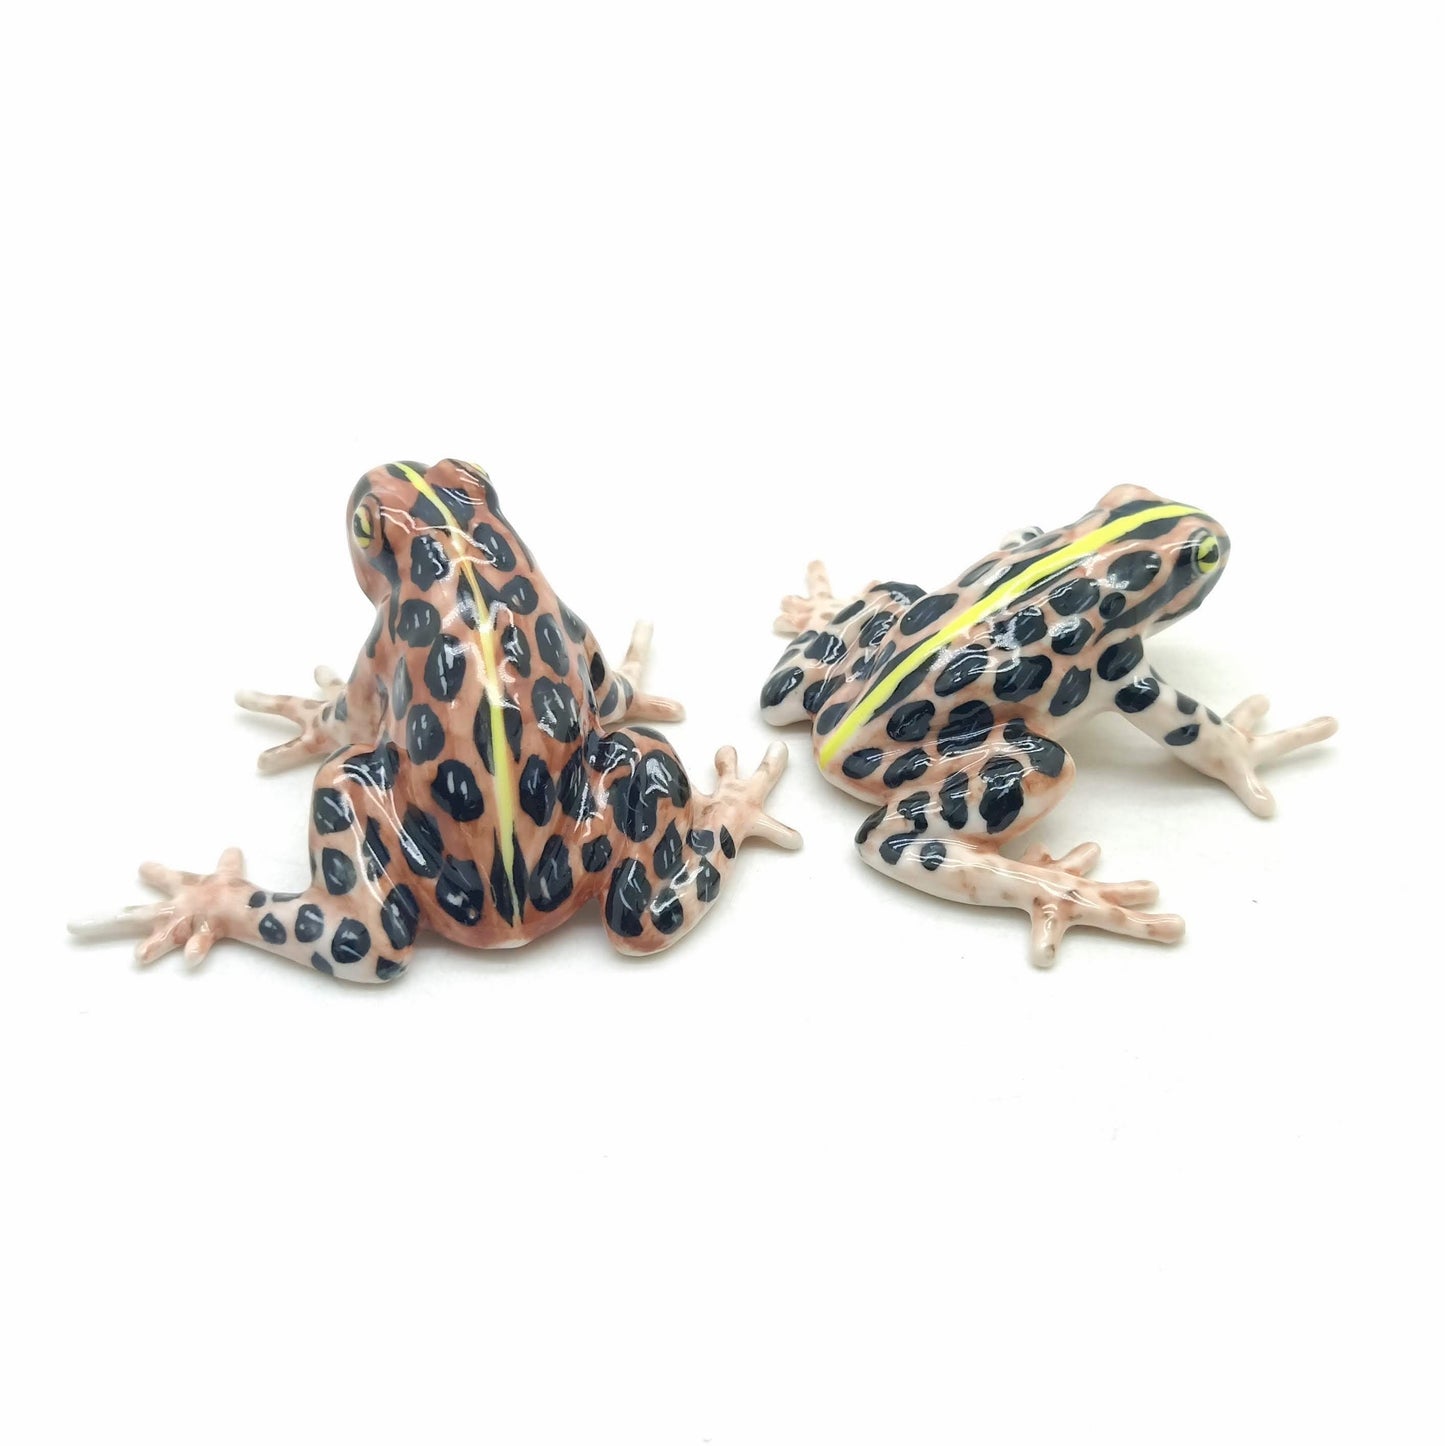 2 Brown Forest Mating Frogs